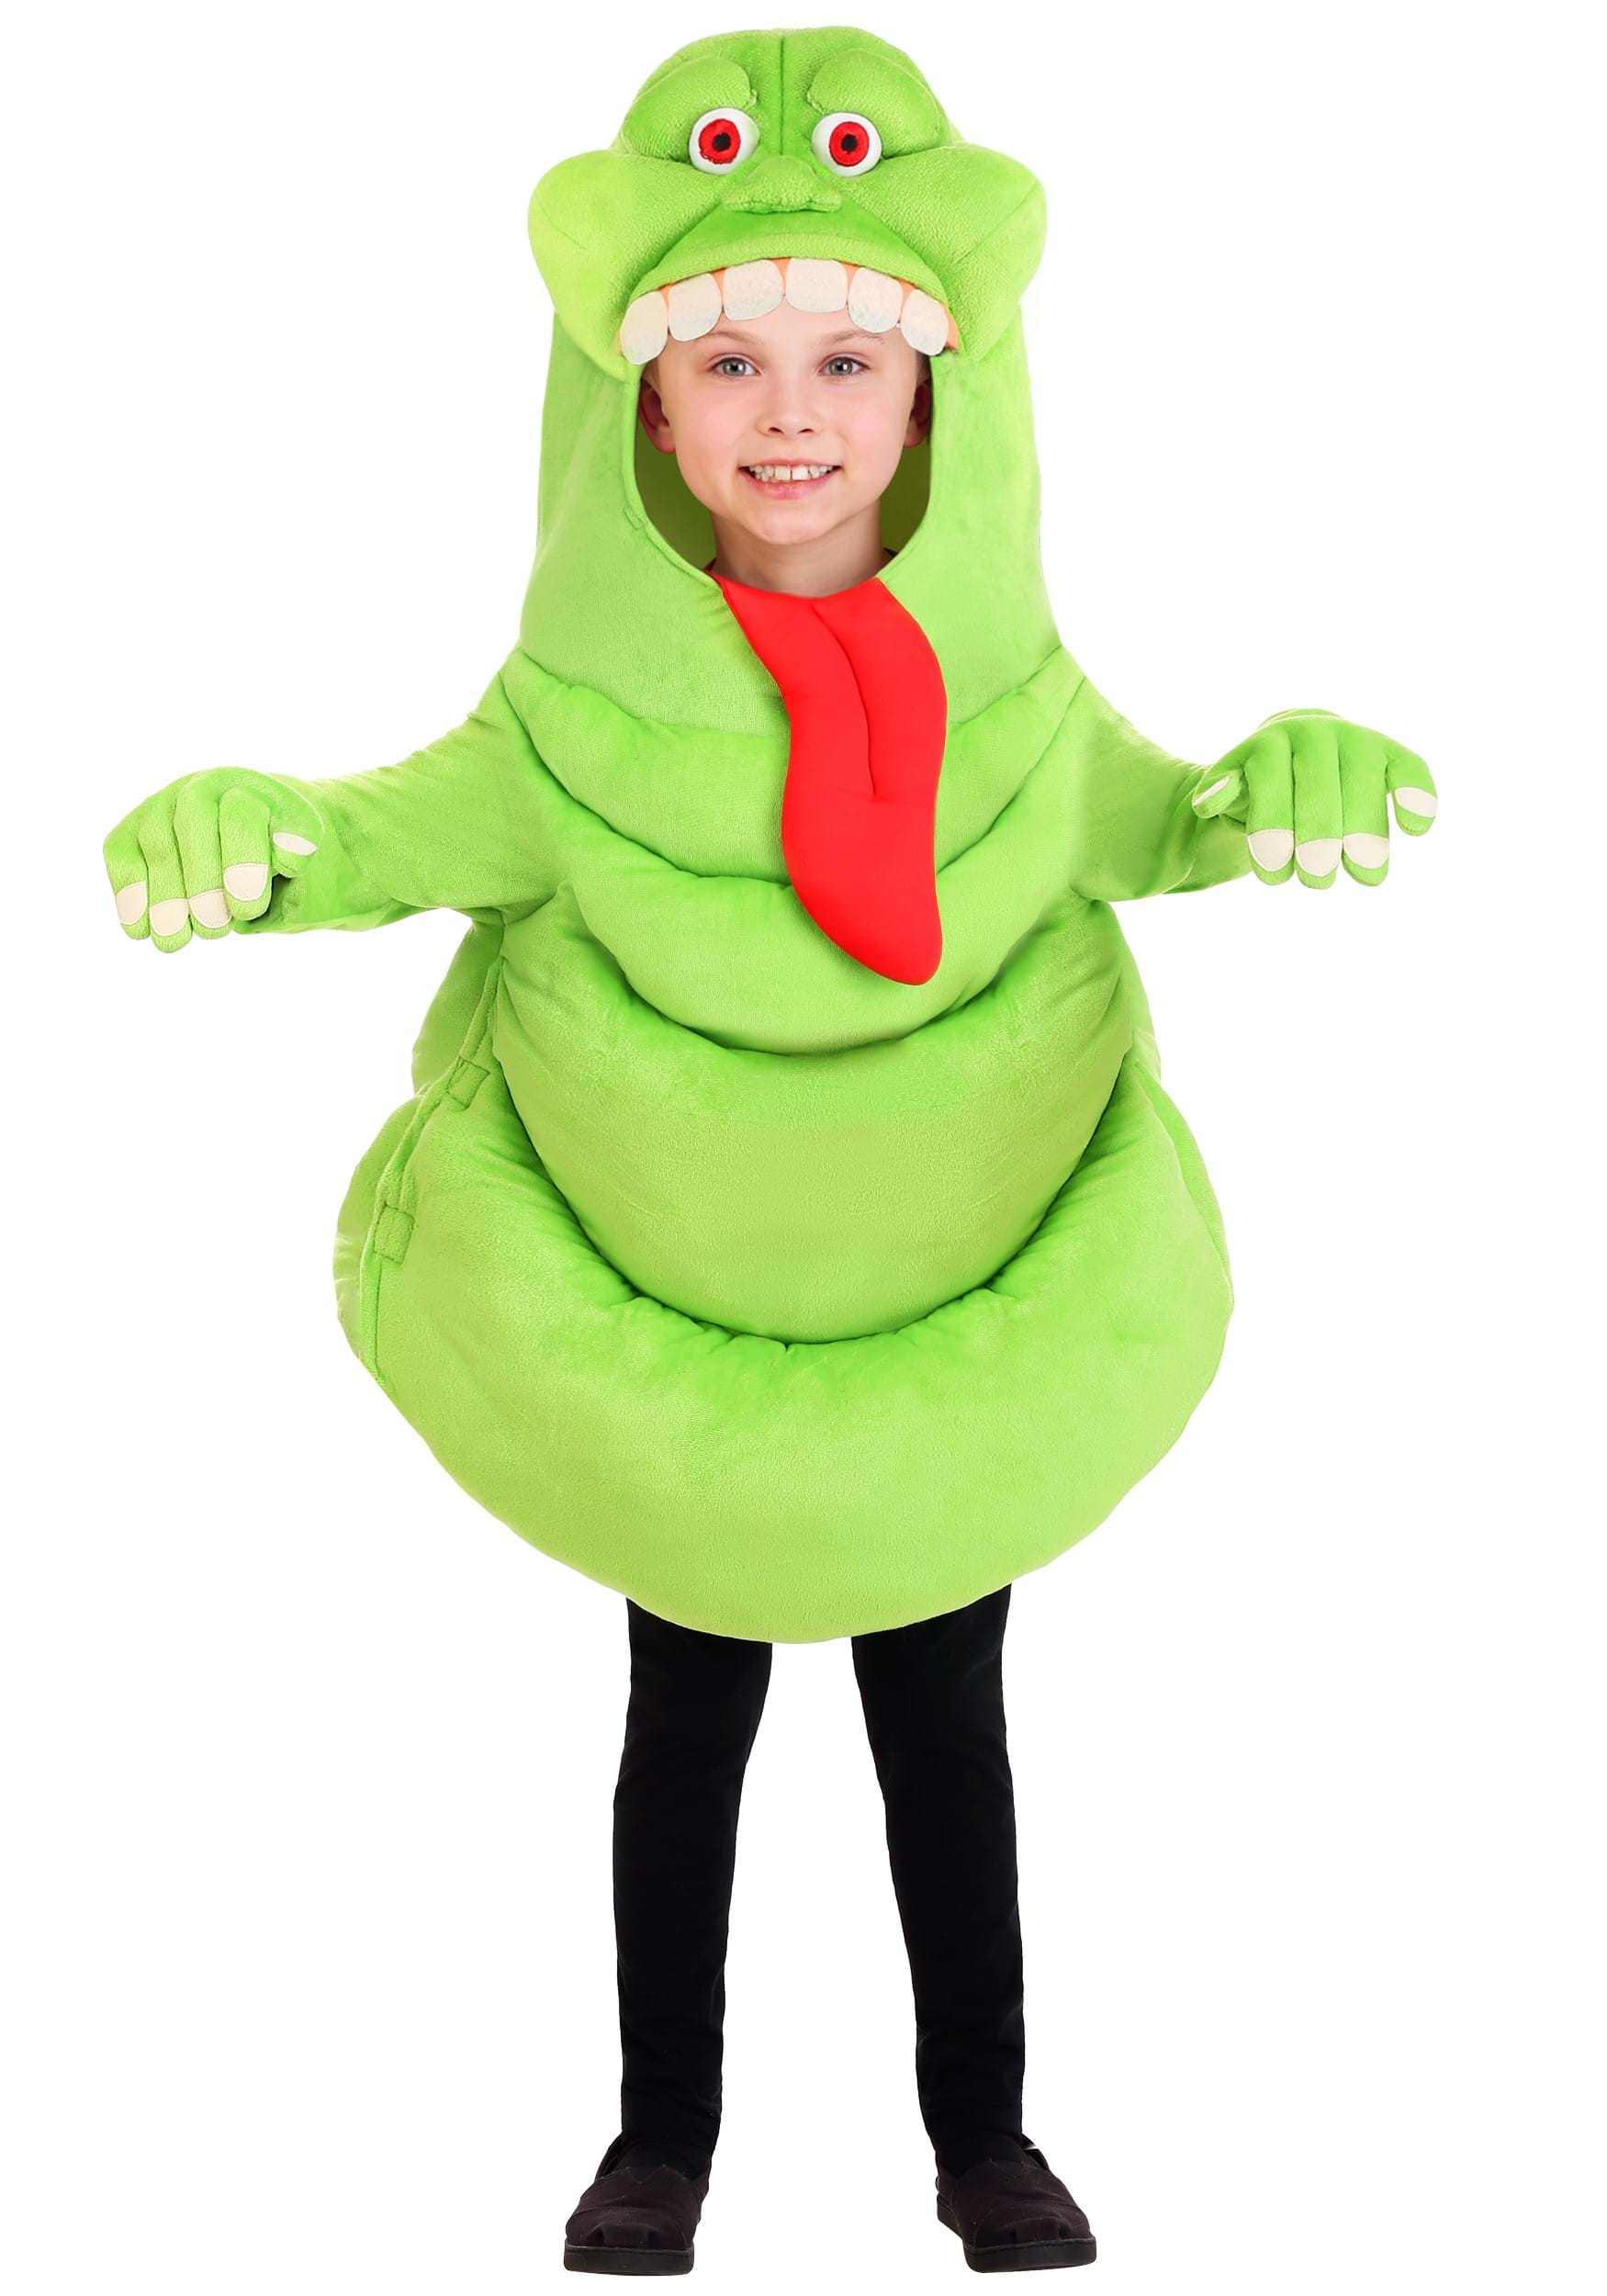 Photos - Fancy Dress FUN Costumes Kid's Ghostbusters Slimer Costume Tunic With Gloves Green/